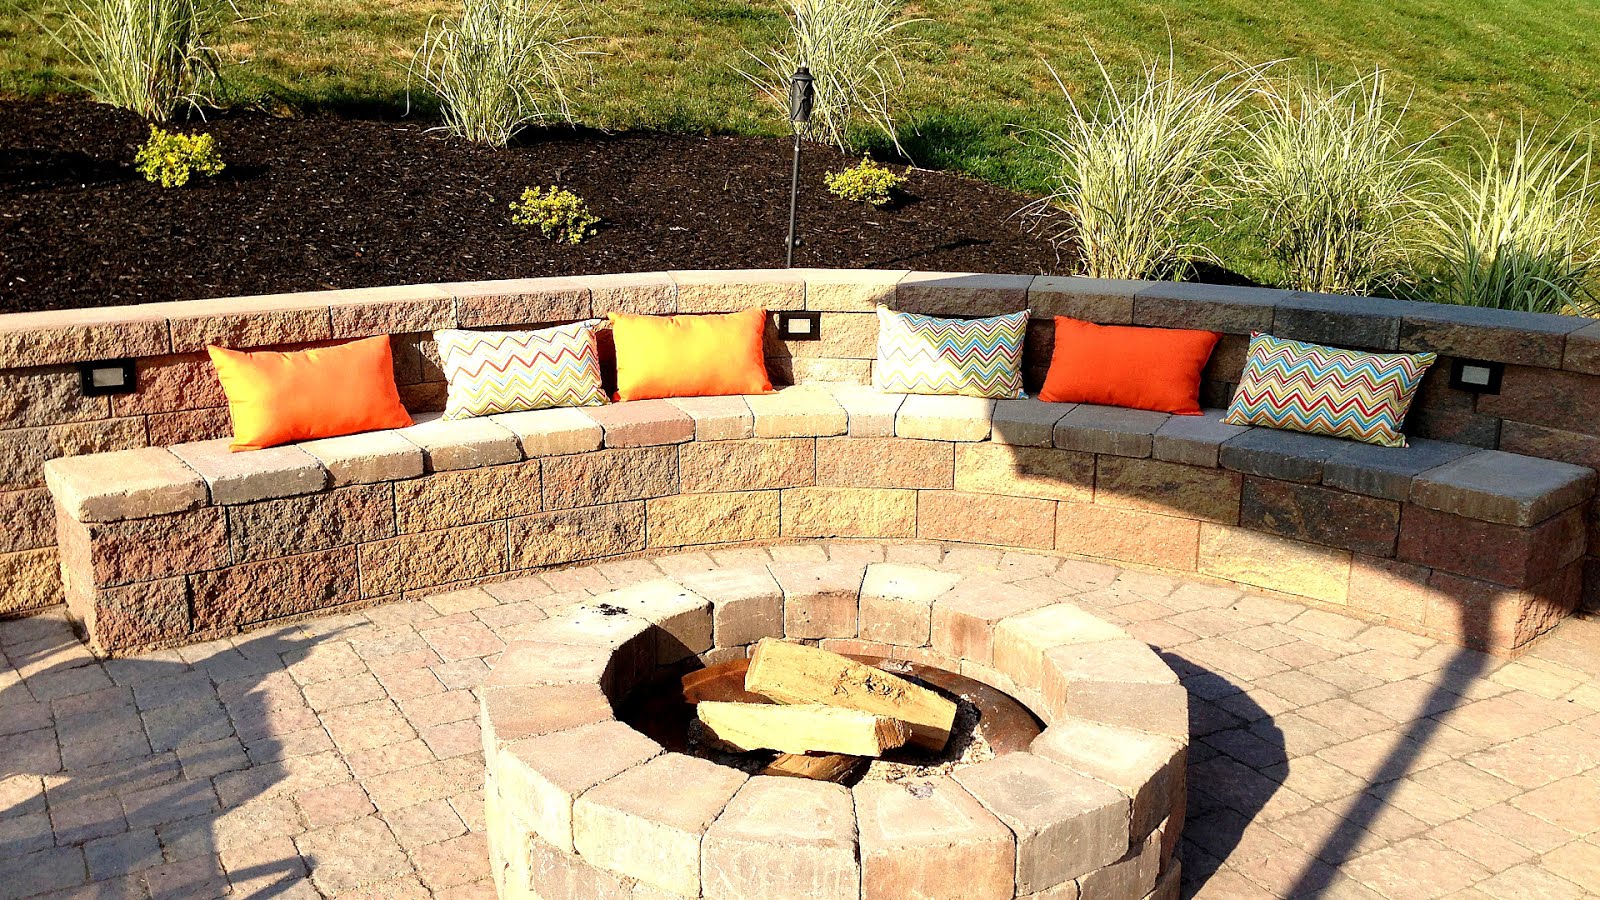 How To Build A Fire Pit With Retaining Wall Blocks - Fire ...